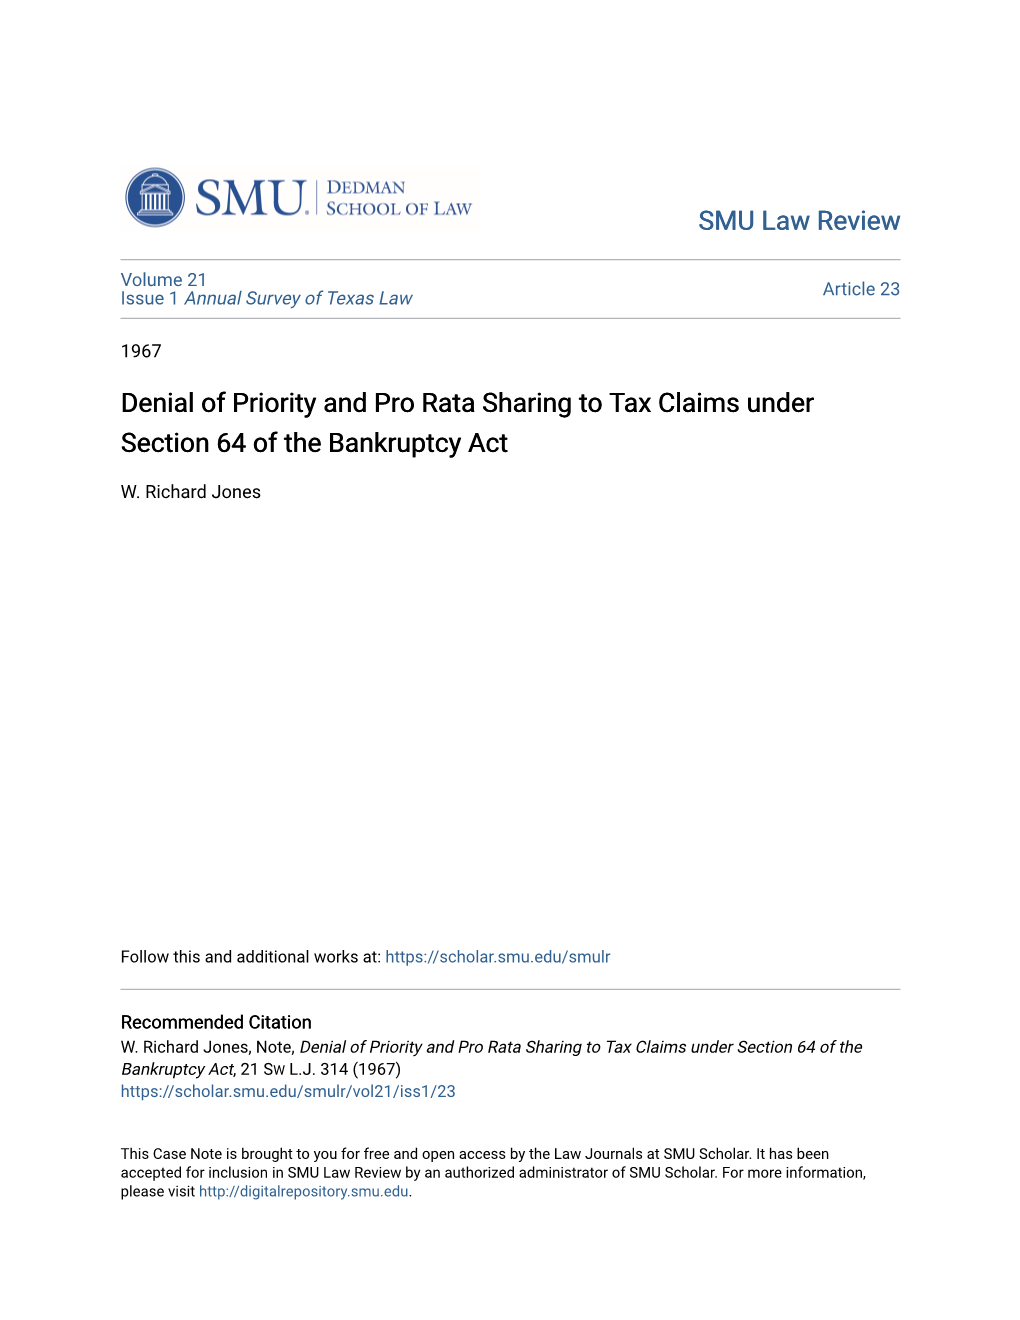 Denial of Priority and Pro Rata Sharing to Tax Claims Under Section 64 of the Bankruptcy Act